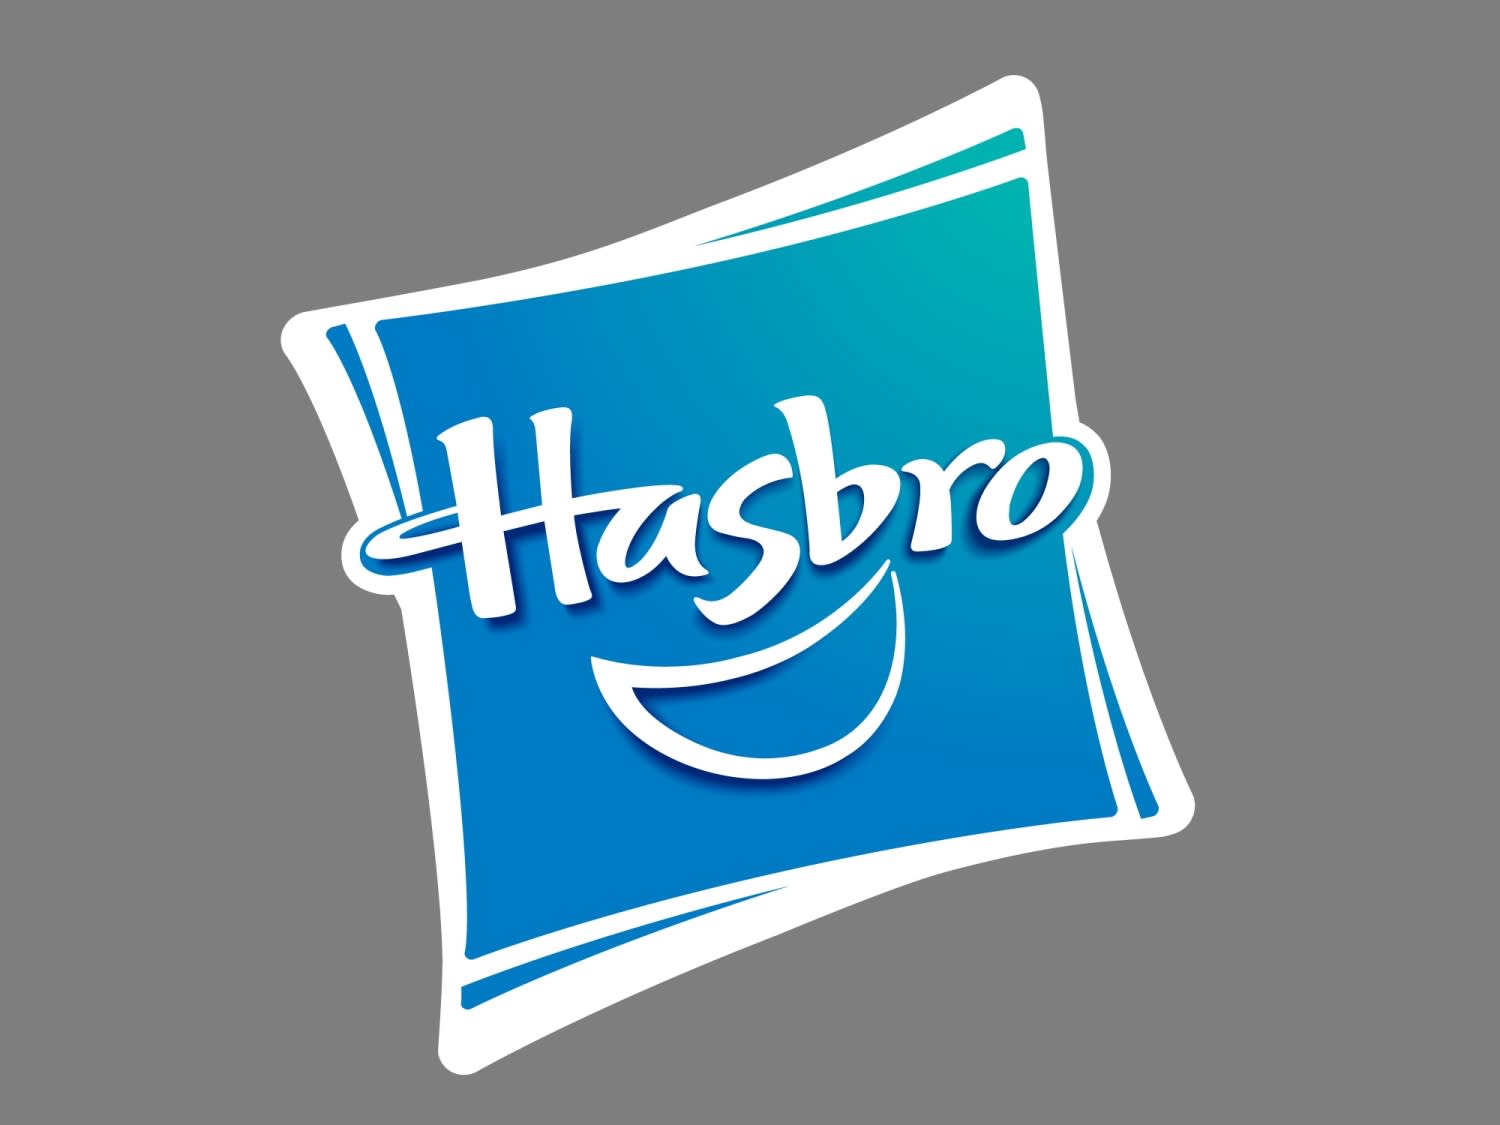 ToyFarce News: Hasbro Appoints Member of the Live Chat as New CEO?!